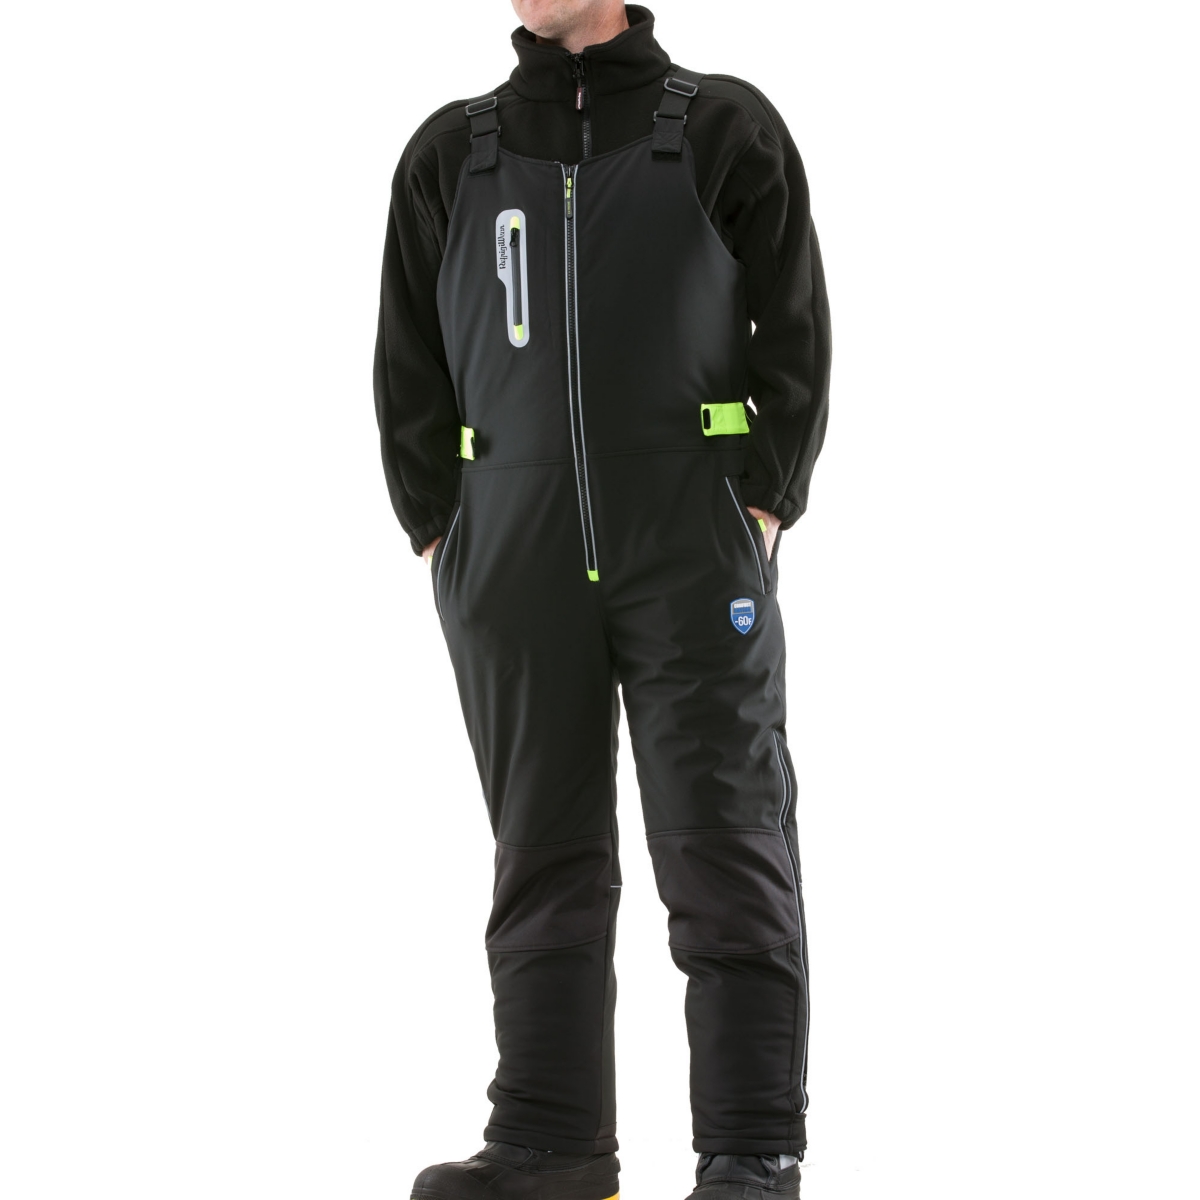 Big & Tall Insulated Extreme Softshell High Bib Overalls -60F Protection - Black